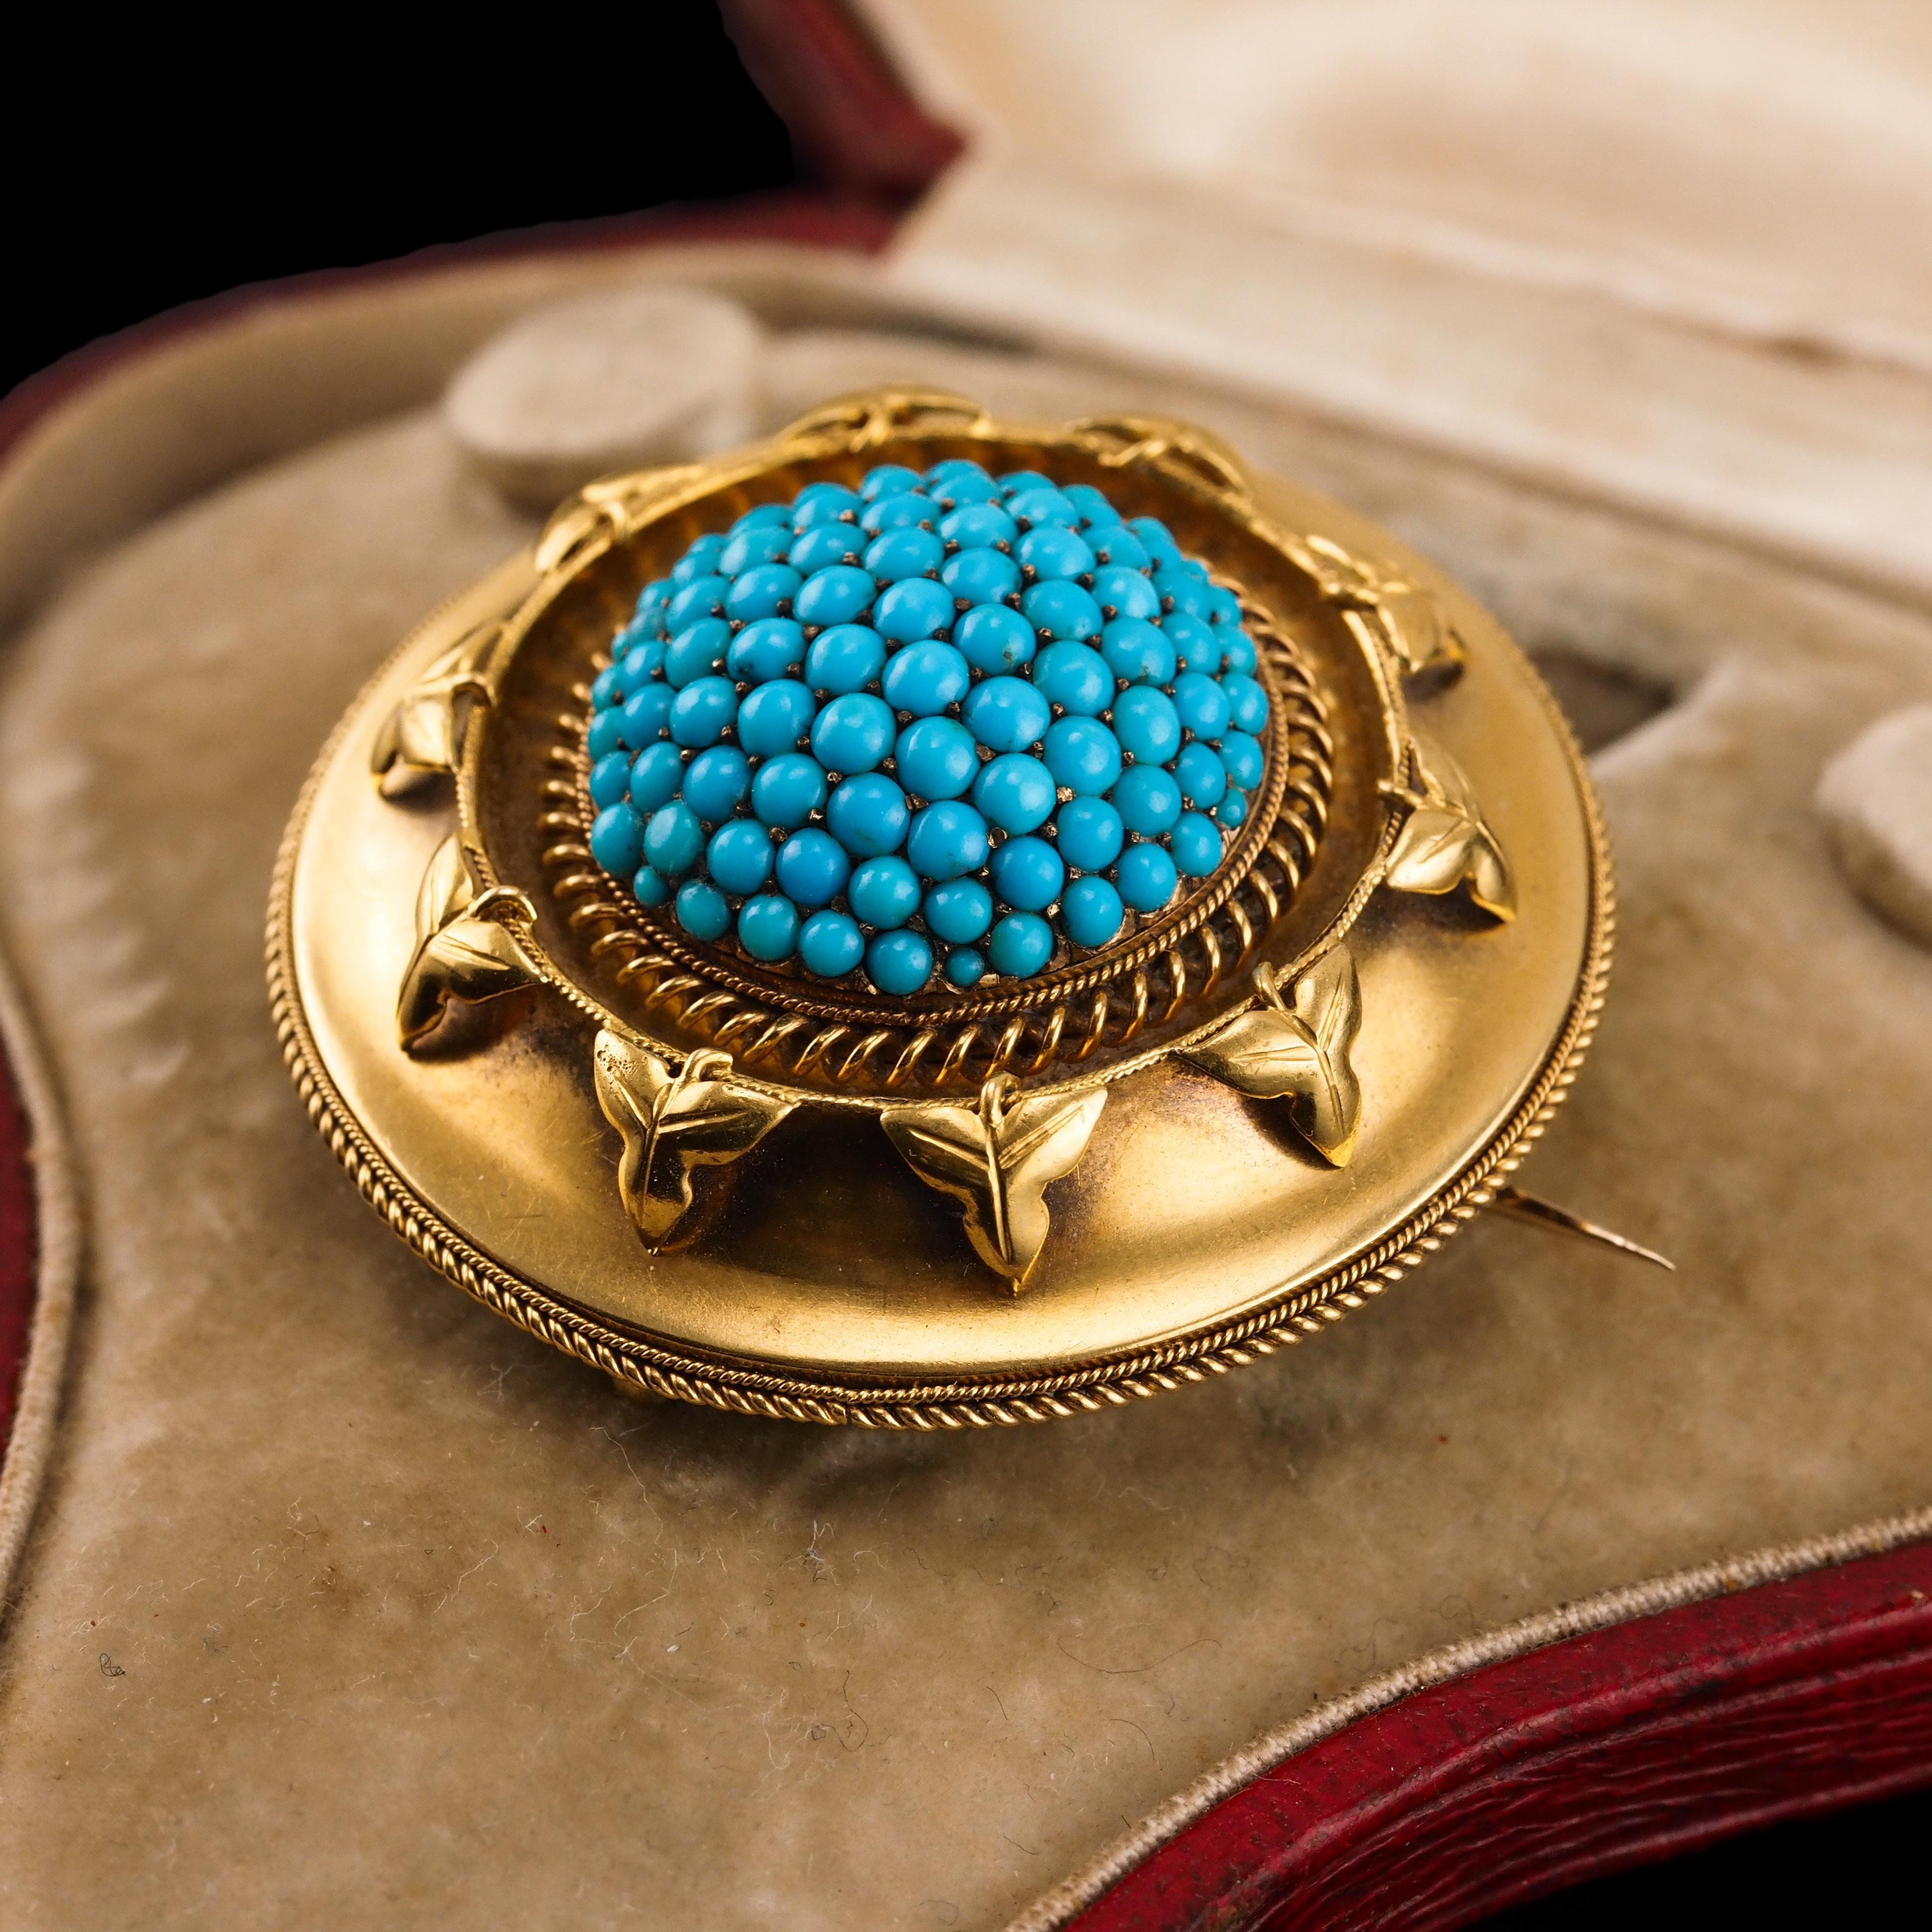 Antique Victorian Turquoise Pendant Necklace Brooch 18K Gold Etruscan c.1880 For Sale 5